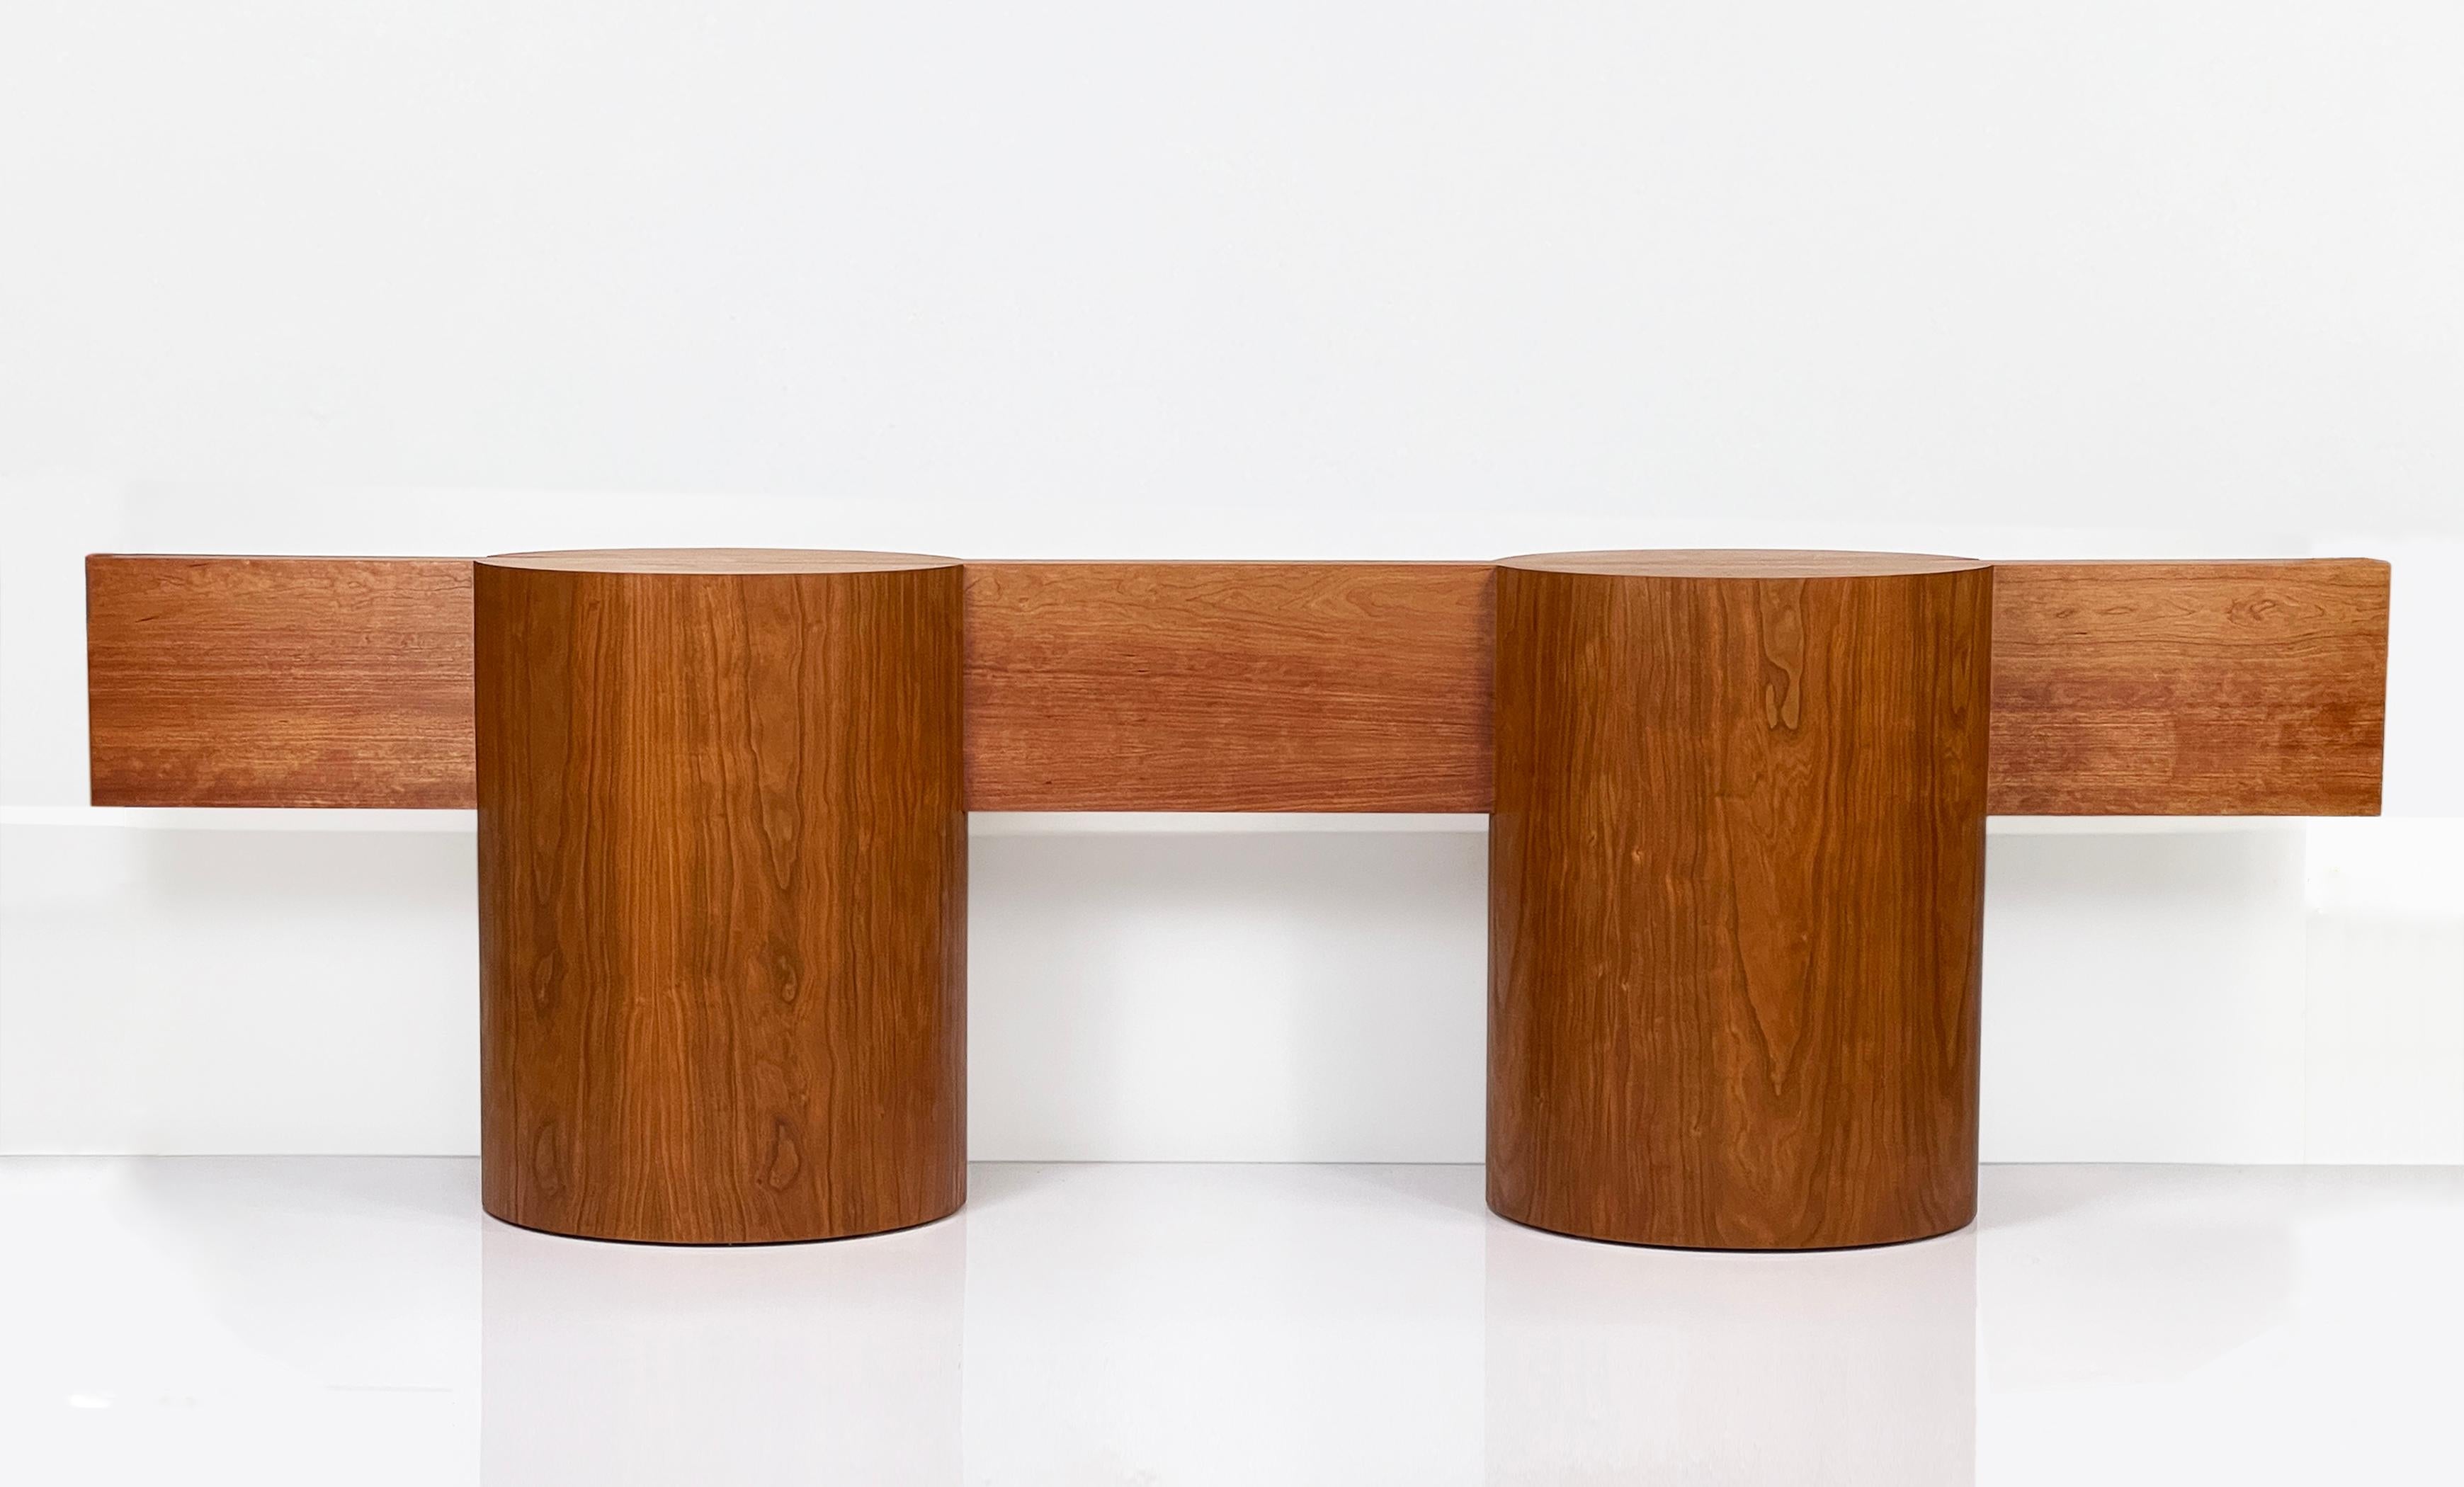 The kimono table features a very substantial tenon mortised into two large, round drums.
The tenon is 92